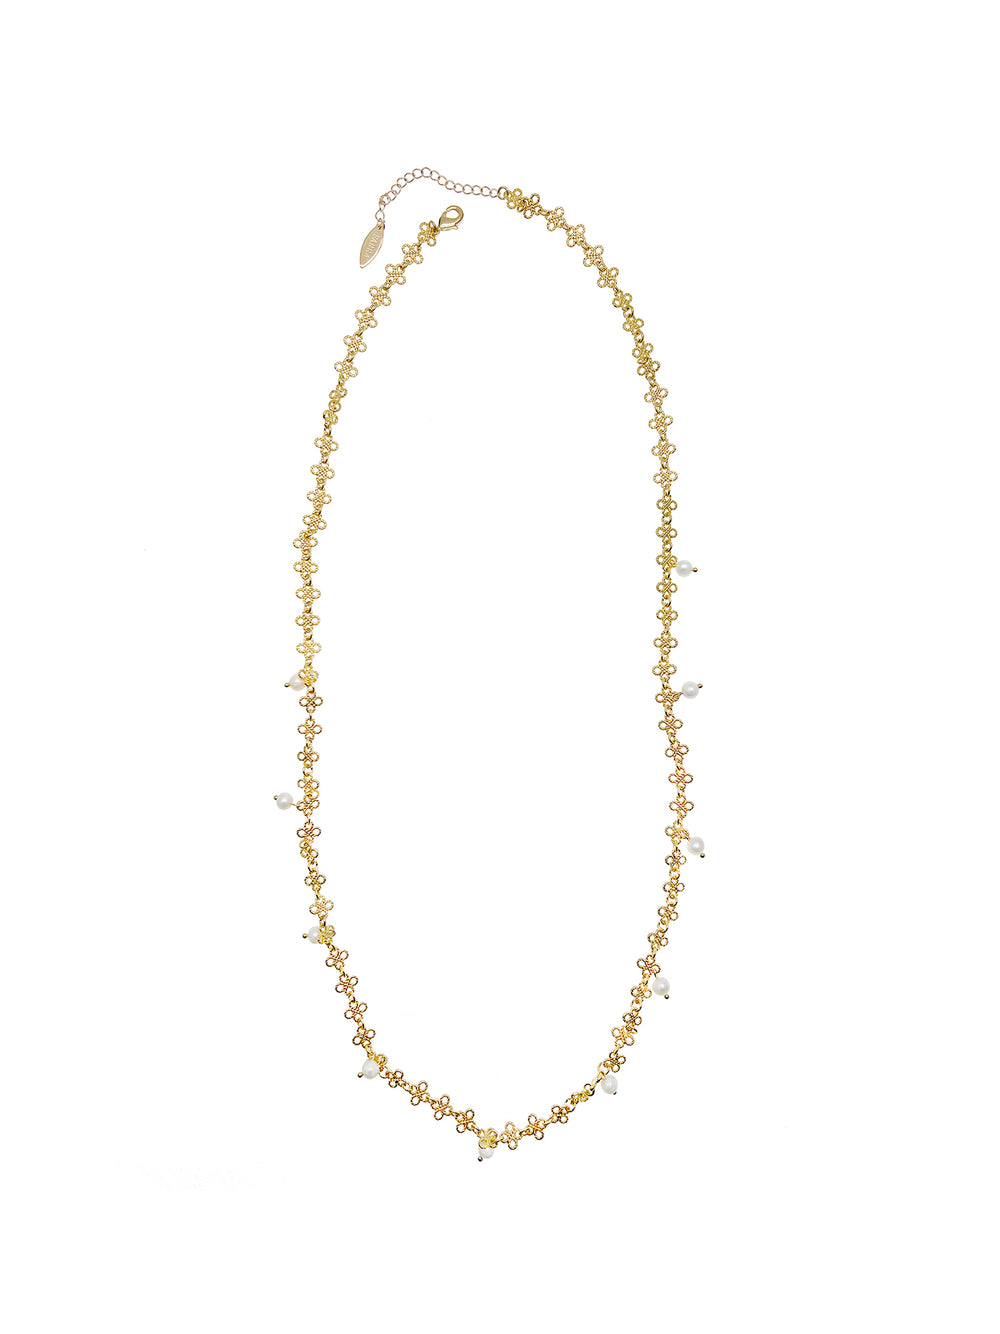 Chain with Pearls Delicacy Necklace JN025 - FARRA